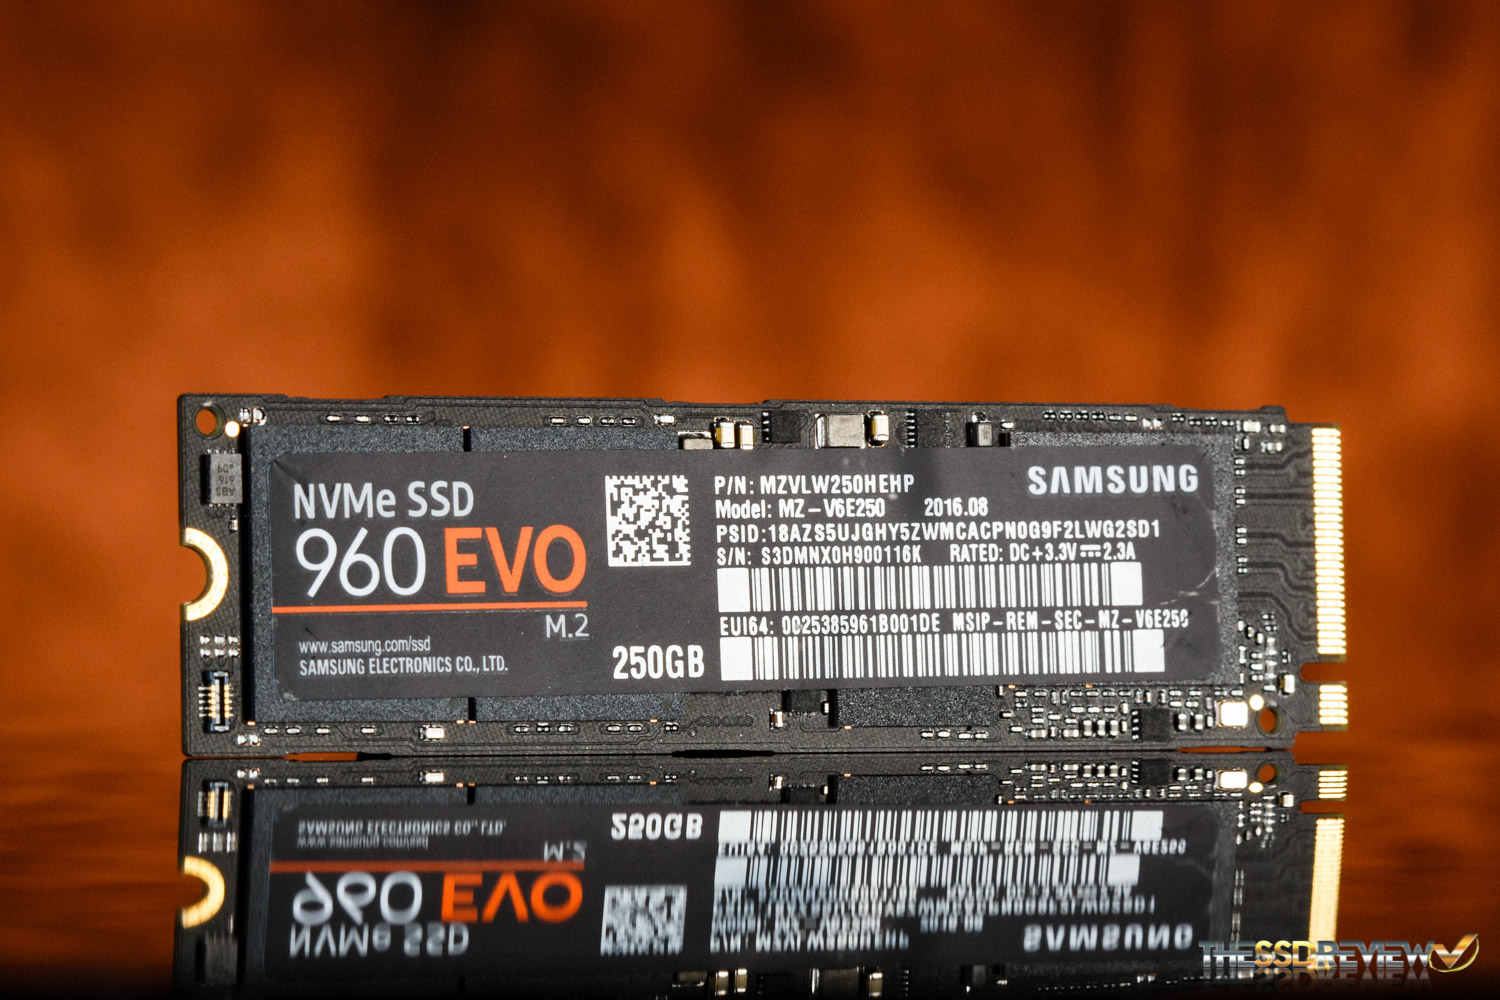 Samsung 960 M.2 SSD (250GB/1TB) | The Review